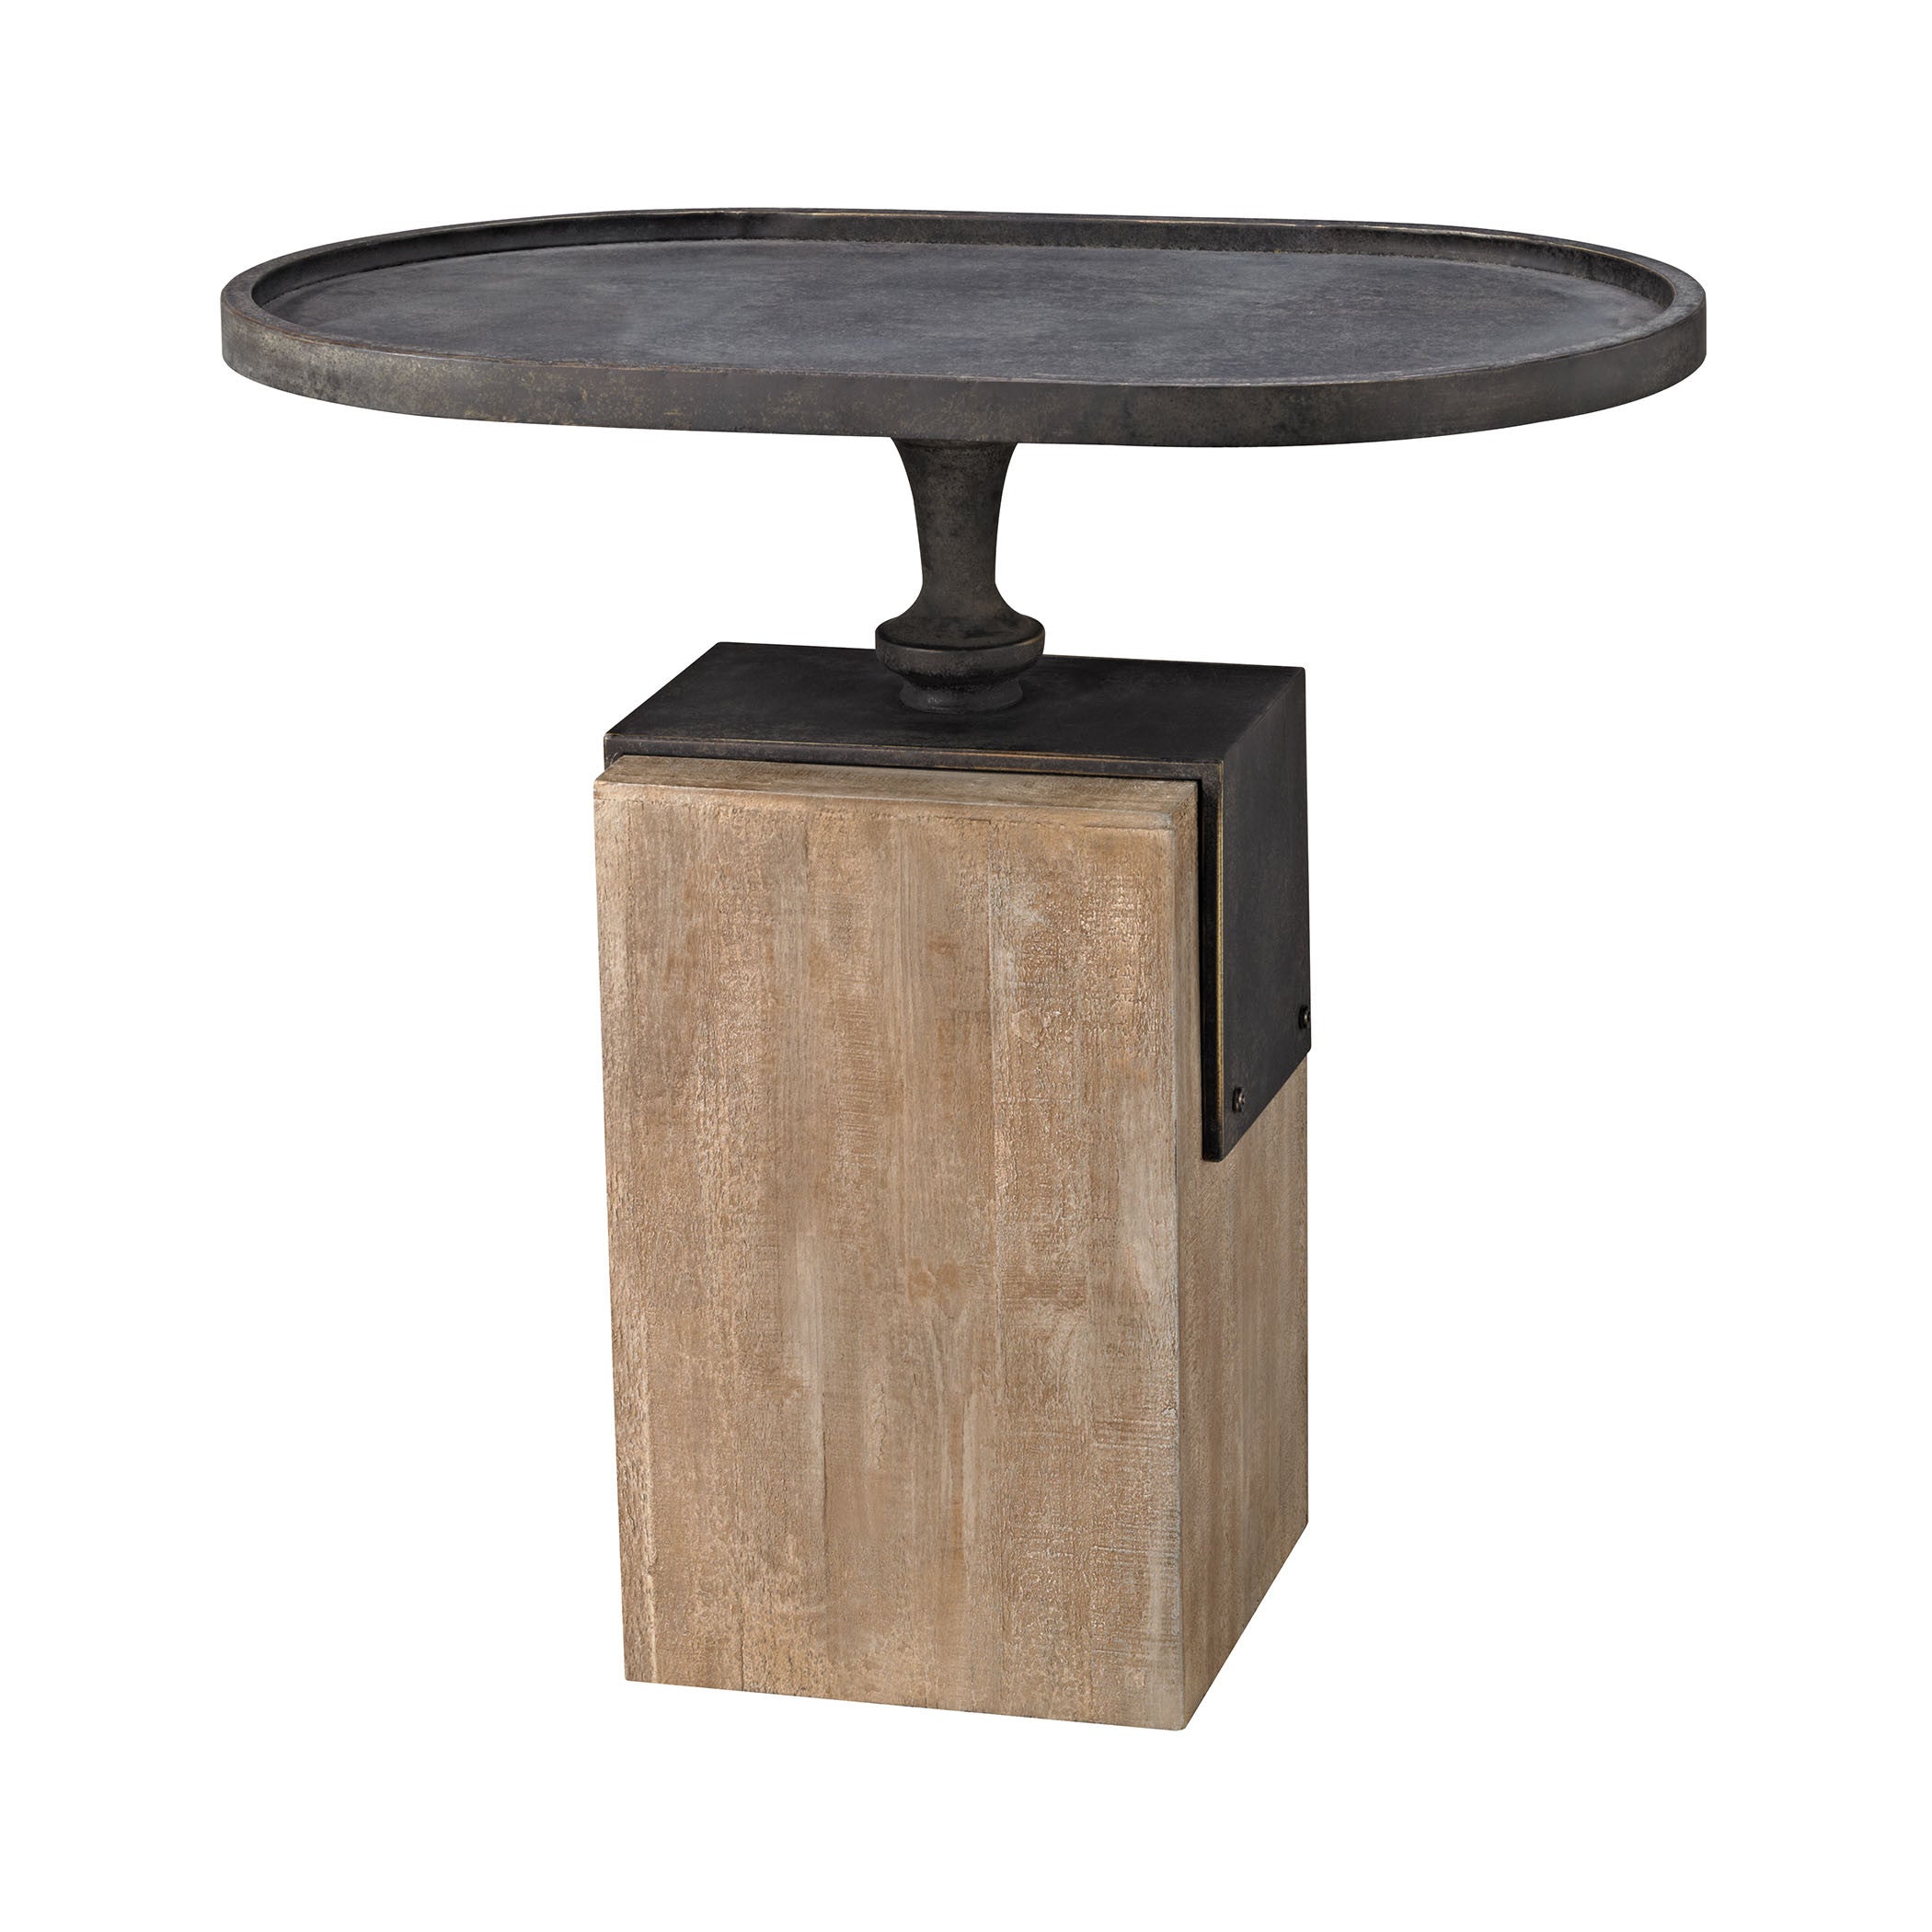 Guildmaster Gui-326-8724 Robard Collection Blackened Iron,natural Woodtone Finish Table